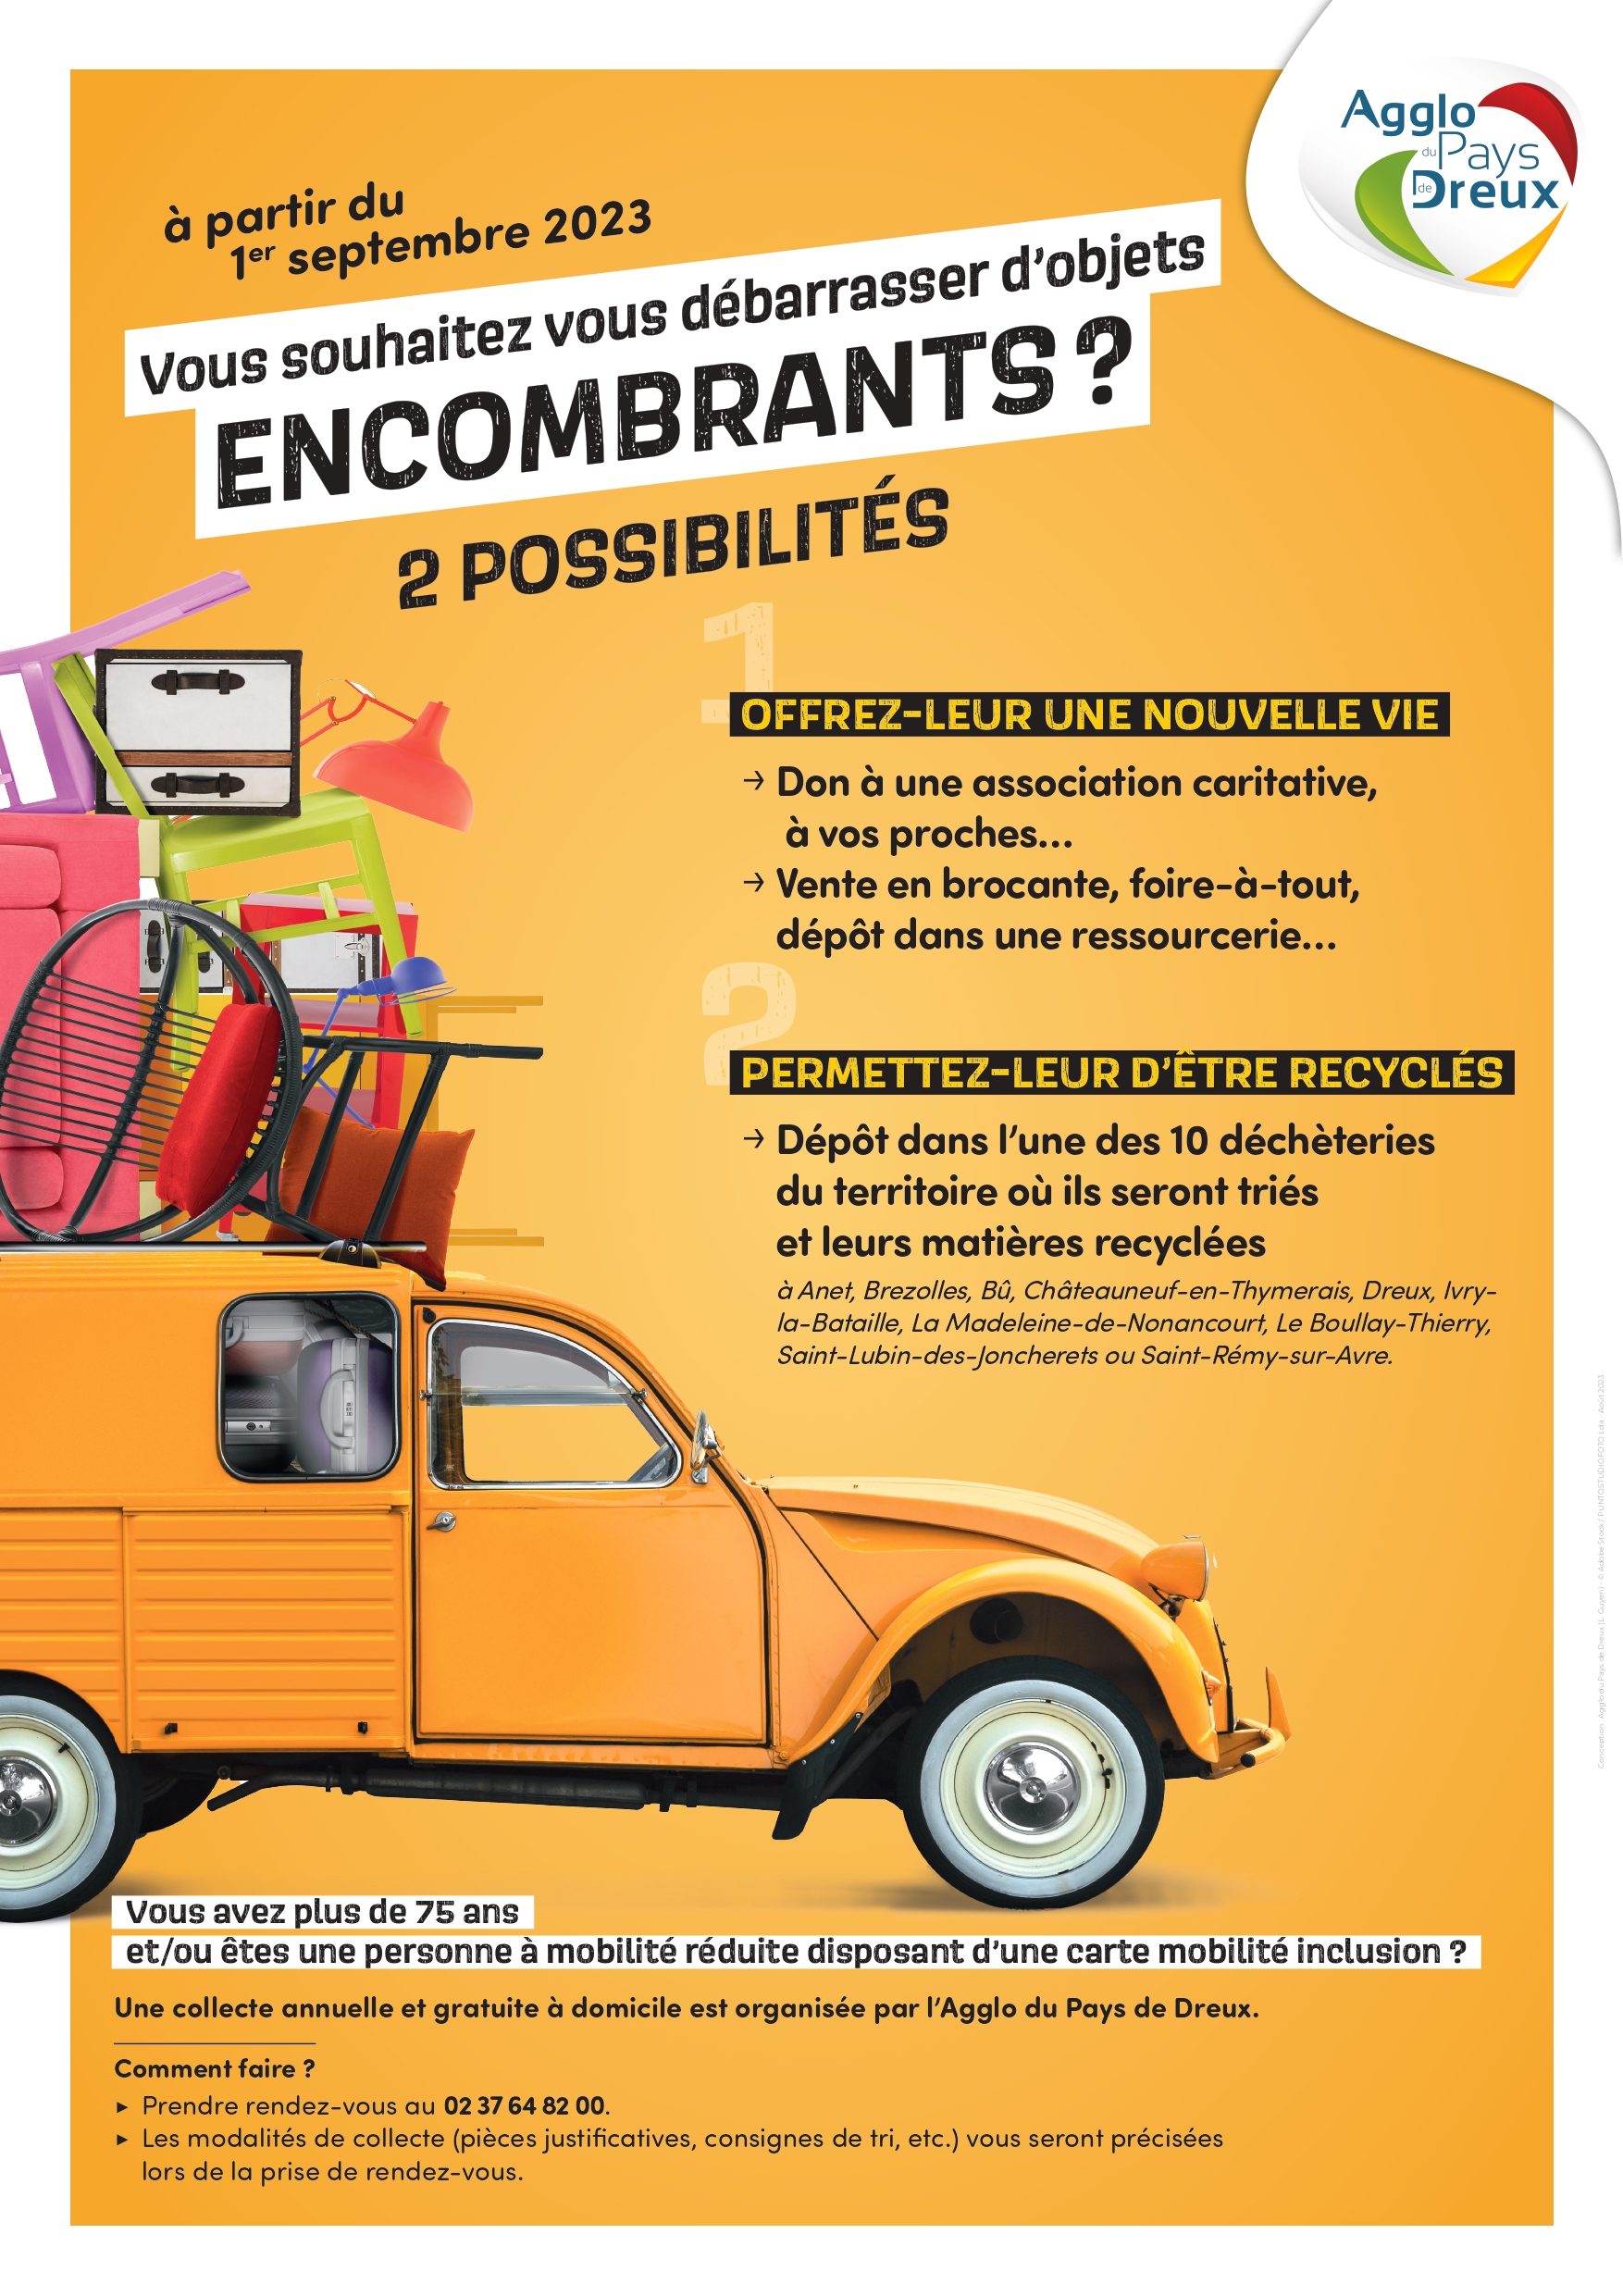 Encombrants_Affiche_pages-to-jpg-0001 _1_.jpg